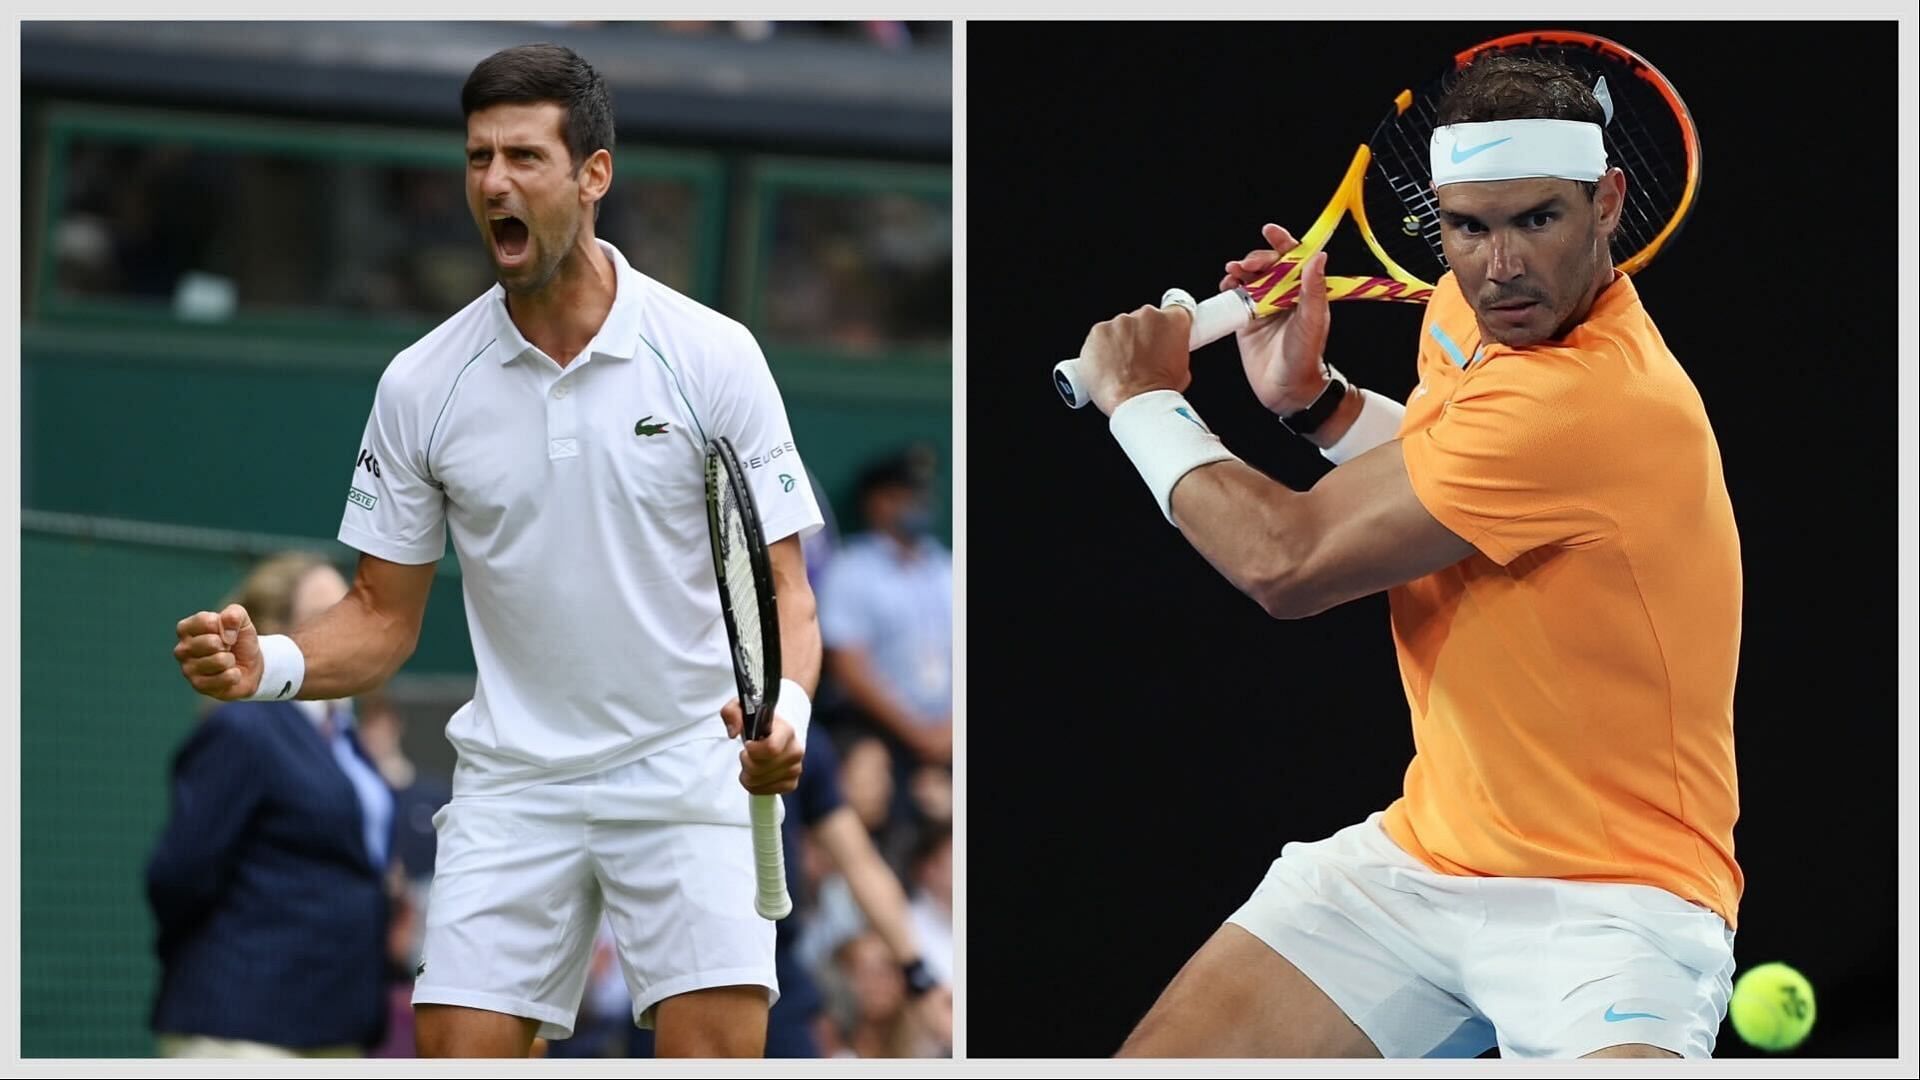 Novak Djokovic vs Rafael Nadal, Paris Olympics 2024, 2R: Where to watch, TV schedule, live streaming details and more